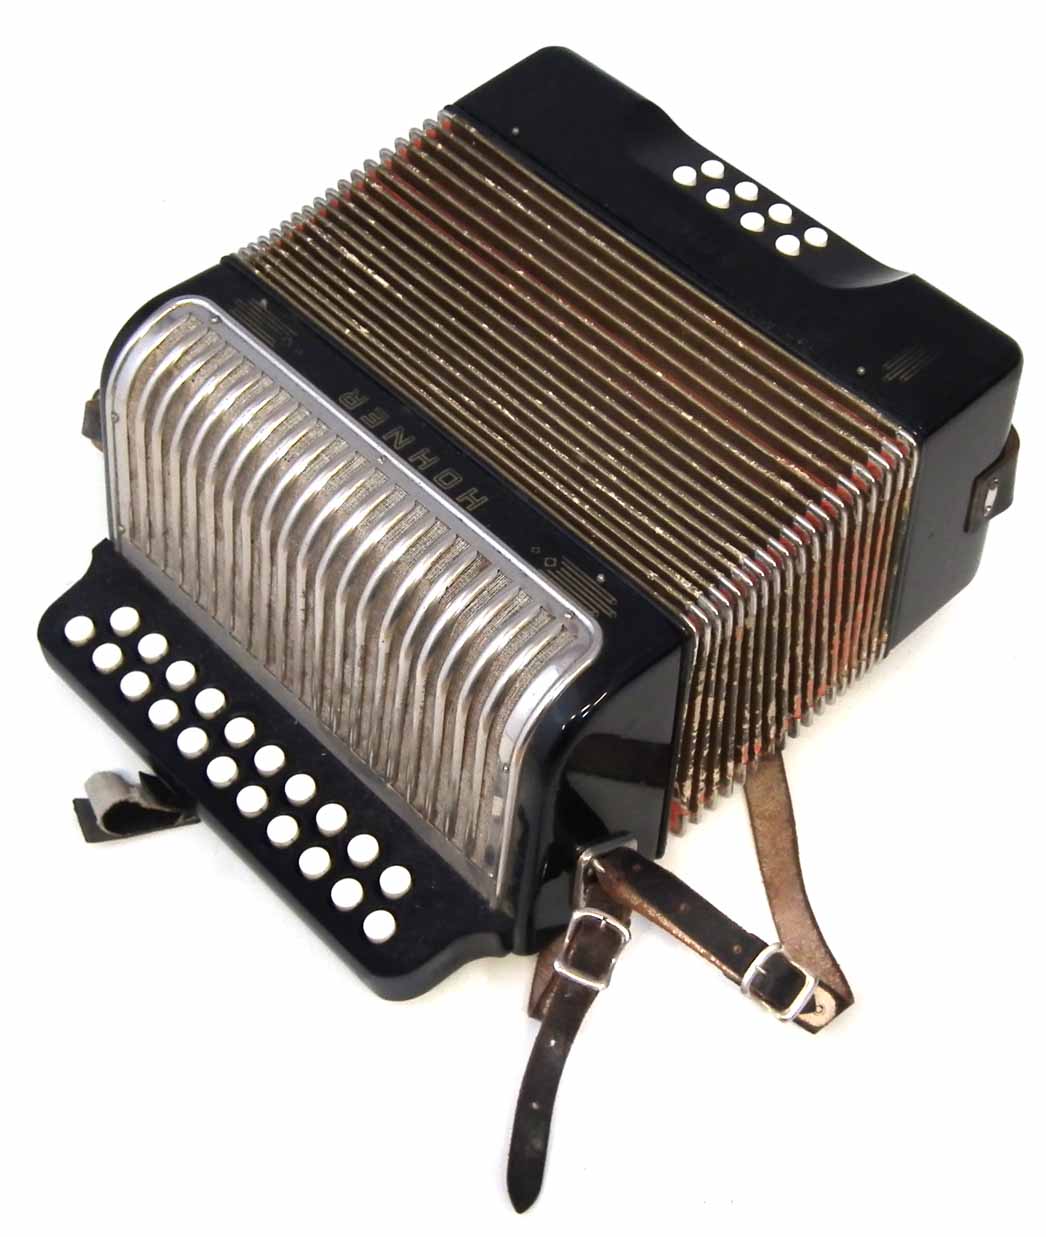 Hohner Erica accordion, with twenty-one button keys and eight chord notes, 28cm wide Condition